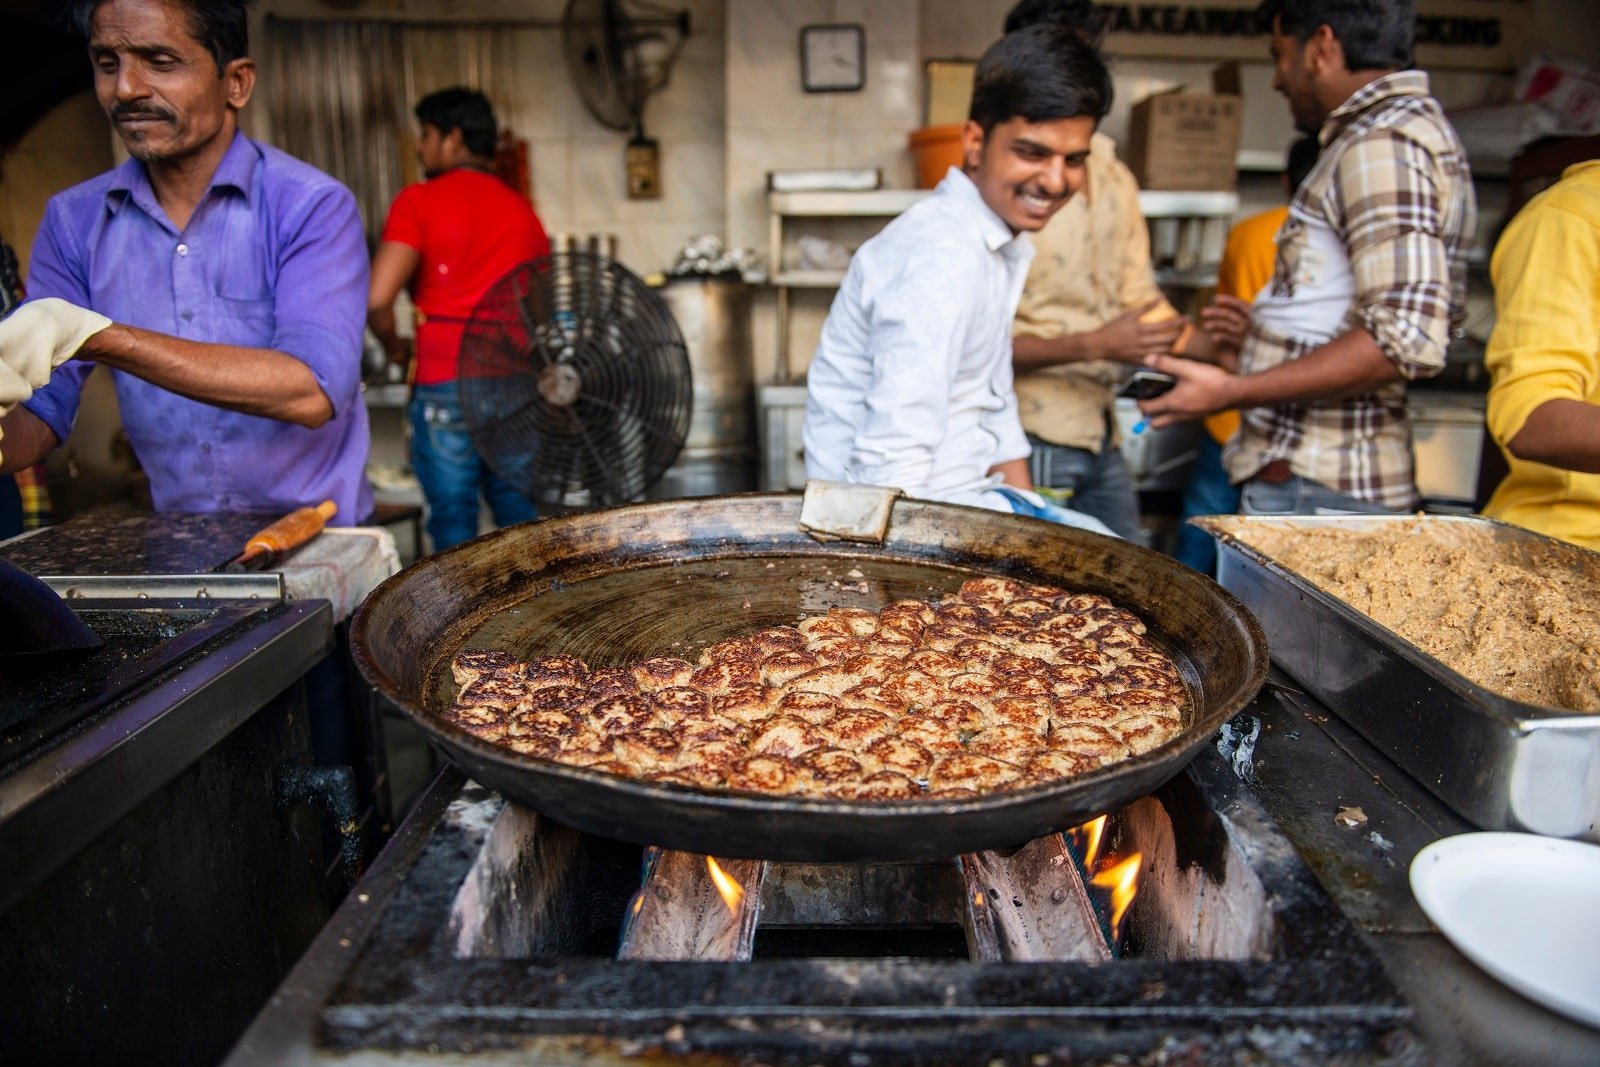 <p><span>In Lucknow, the heart of the Awadhi region, you’ll discover a cuisine known for its sophistication and subtlety. The city is famous for its kebabs, including the melt-in-your-mouth galouti and kakori kebabs. The rich, slow-cooked curries and biryanis here are flavored with exotic spices, offering a taste of the city’s royal past.</span></p> <p><strong>Insider’s Tip: </strong><span>To truly experience the authenticity of Indian cuisine, venture beyond the tourist spots and try street food and local eateries. Look for places with high turnover to ensure freshness and hygiene.</span></p> <p><strong>When To Travel: </strong><span>The ideal time to embark on this culinary journey is from October to March. During these cooler months, the weather is pleasant, making exploring outdoor markets and enjoying street food comfortable.</span></p> <p><strong>How To Get There: </strong><span>India’s major cities are well-connected by international and domestic flights. An extensive network of trains and buses within the country makes intercity travel convenient. For a more local experience, try the Indian Railways, which offers a unique perspective of the country’s diverse landscapes.</span></p>